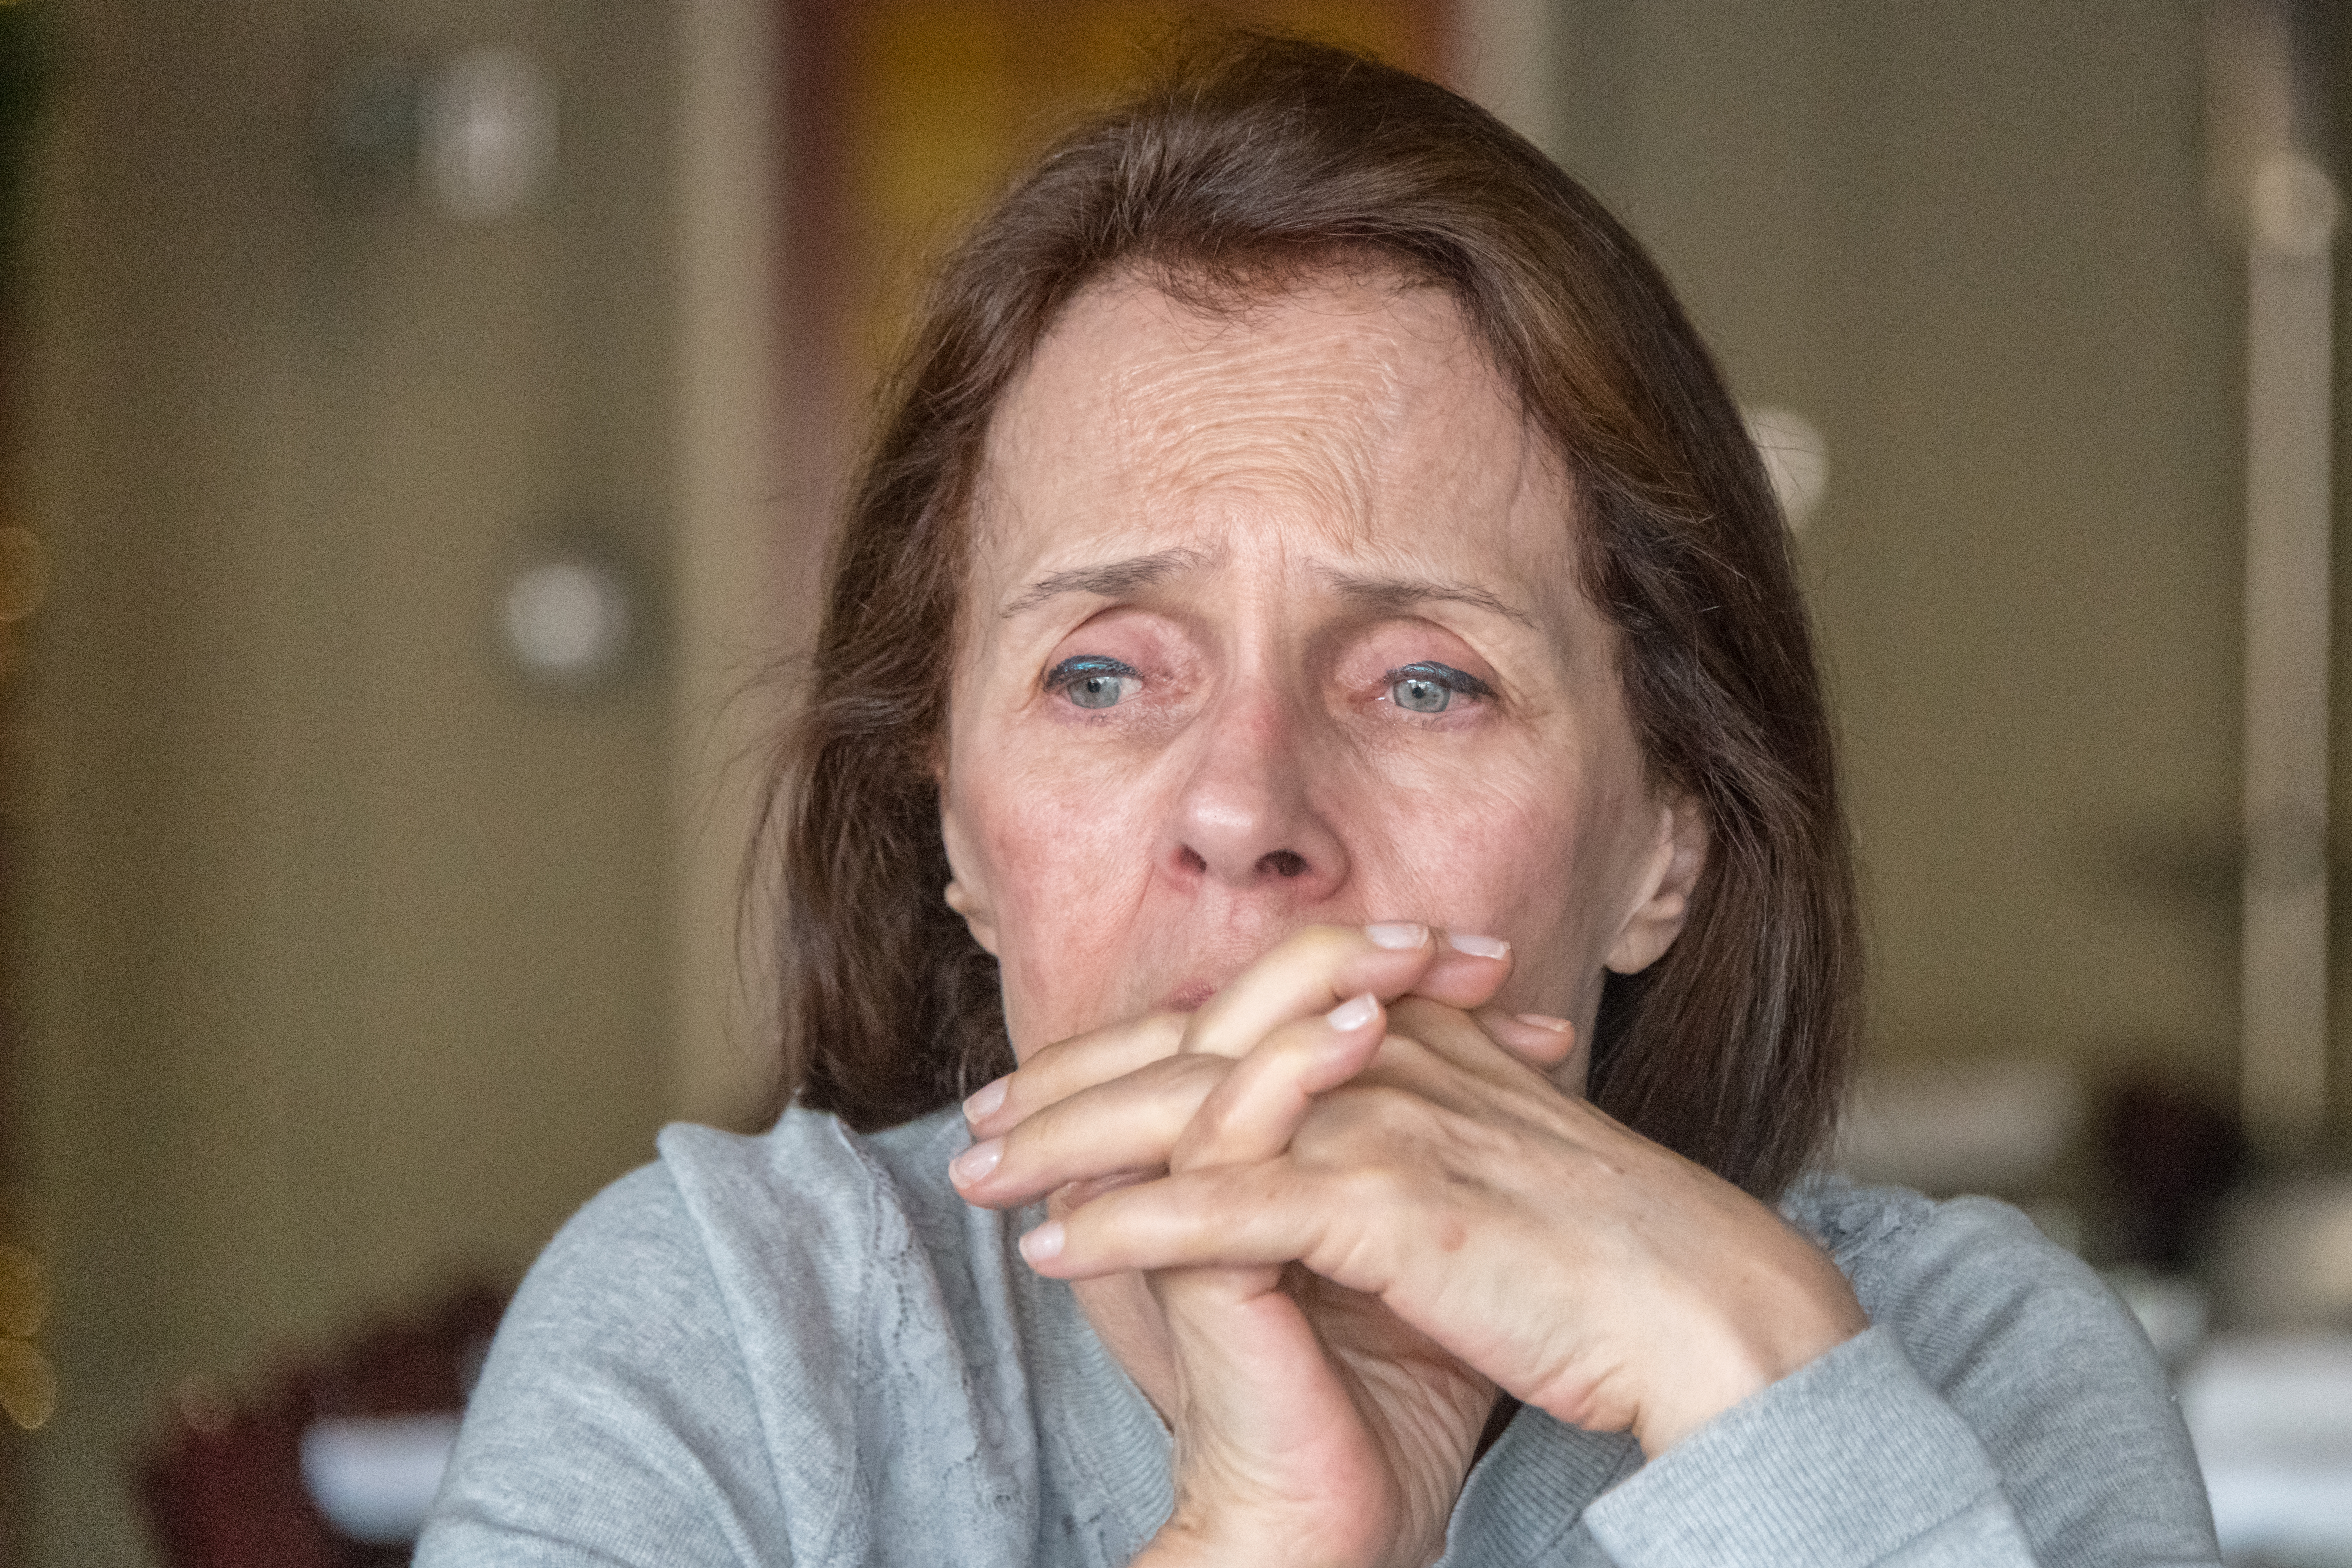 A senior woman crying | Source: Getty Images